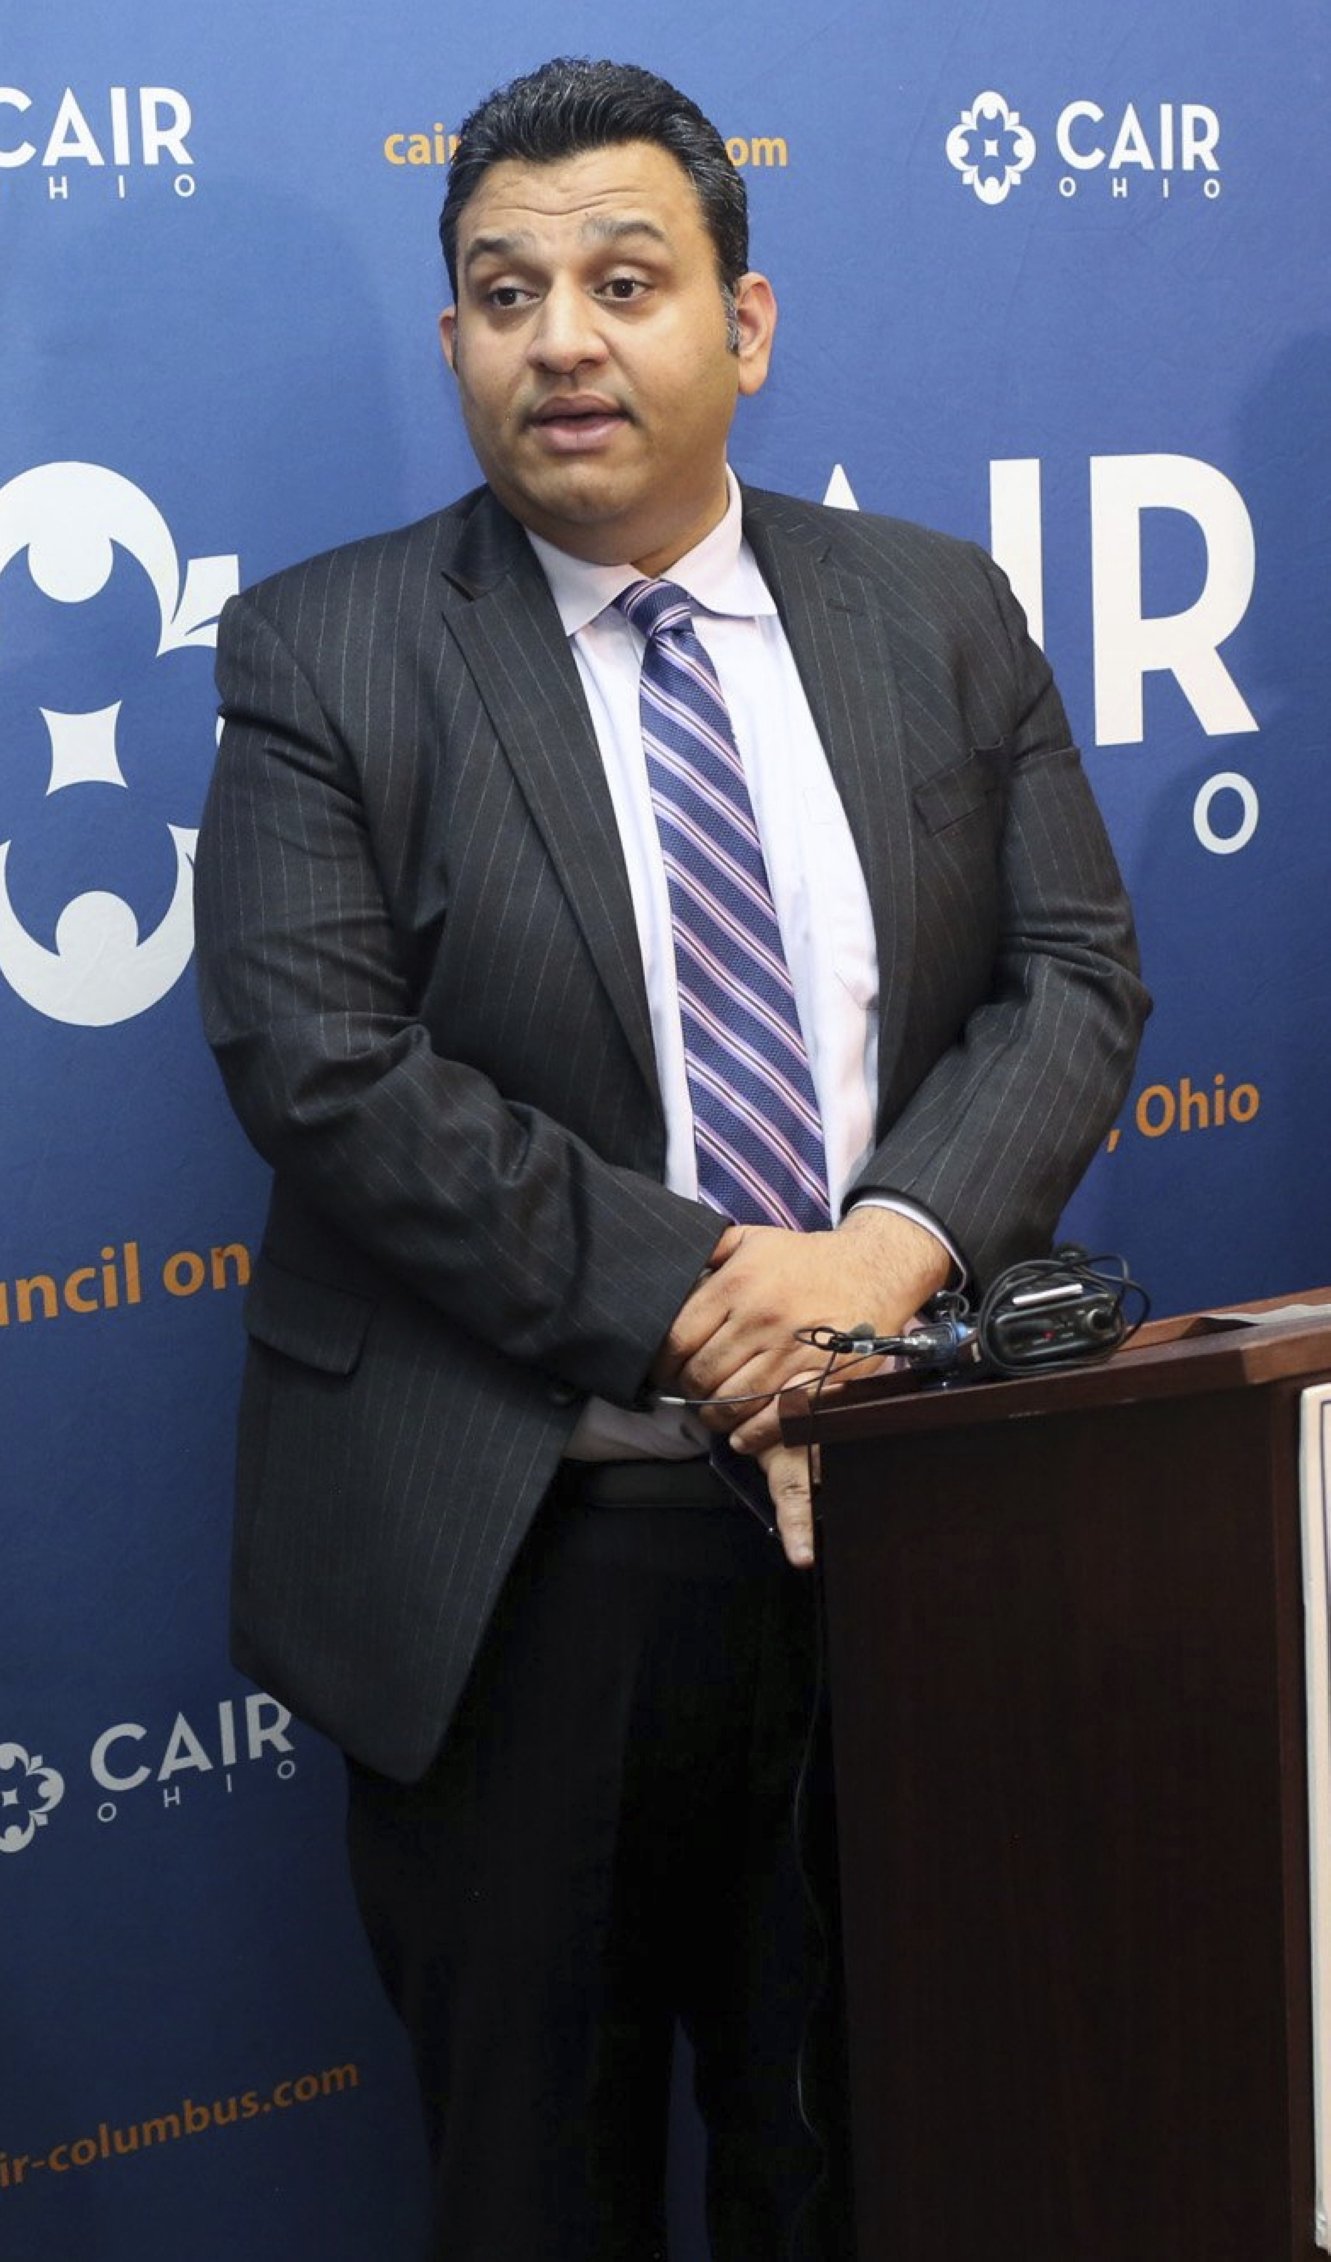 Romin Iqbal of the Council on American-Islamic Relations speaks during a news conference at CAIR-Columbus headquarters in Dublin, Ohio, July 26, 2018. (AP File Photo)